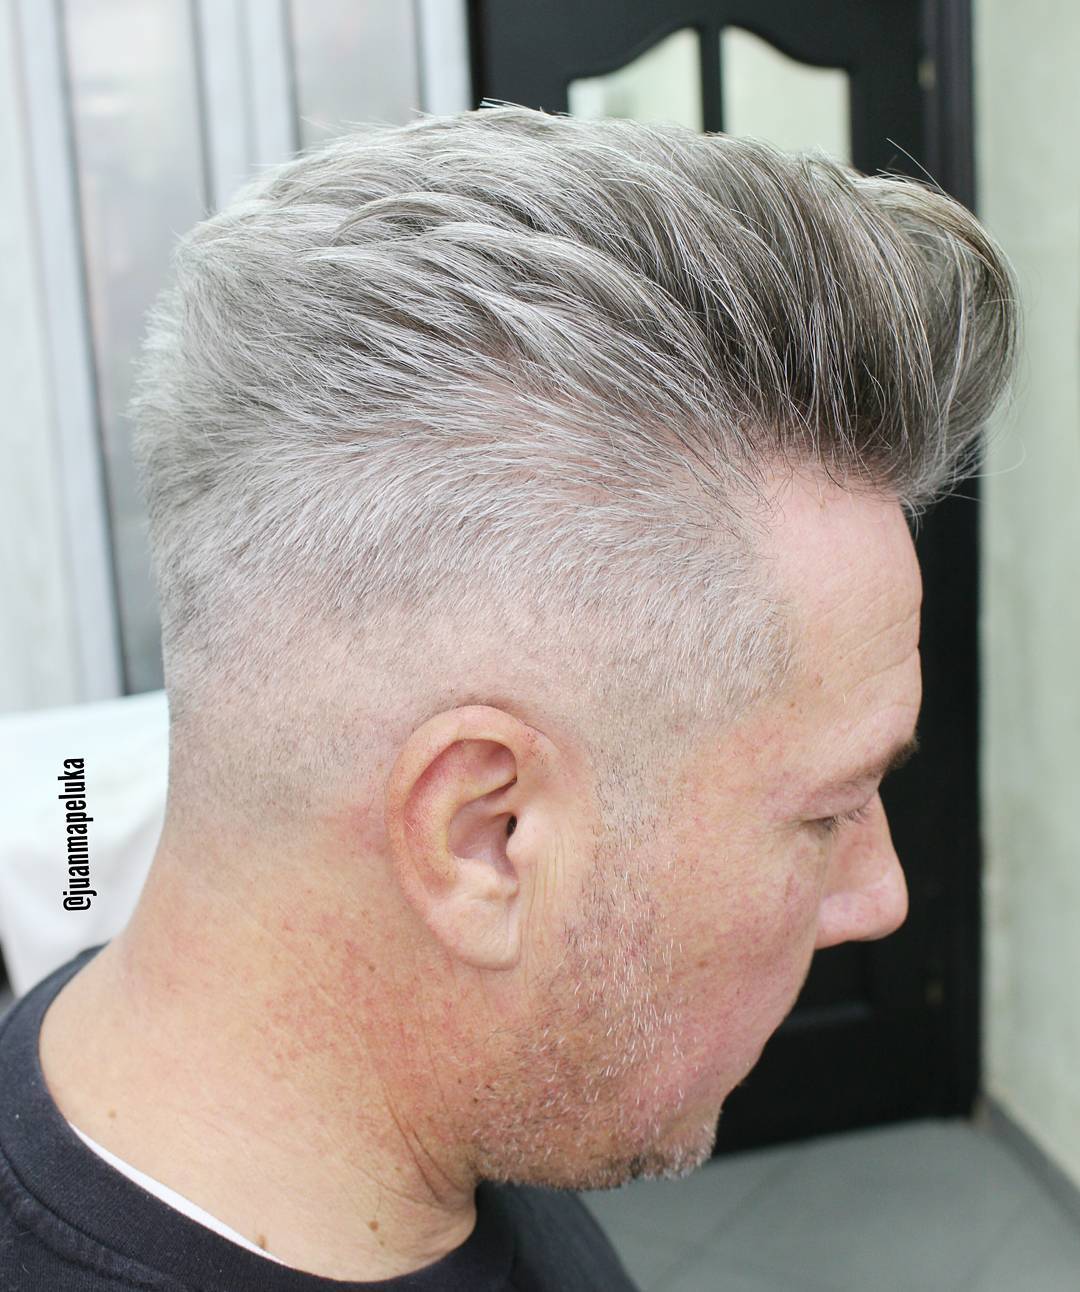 Textured haircut for middle age guys